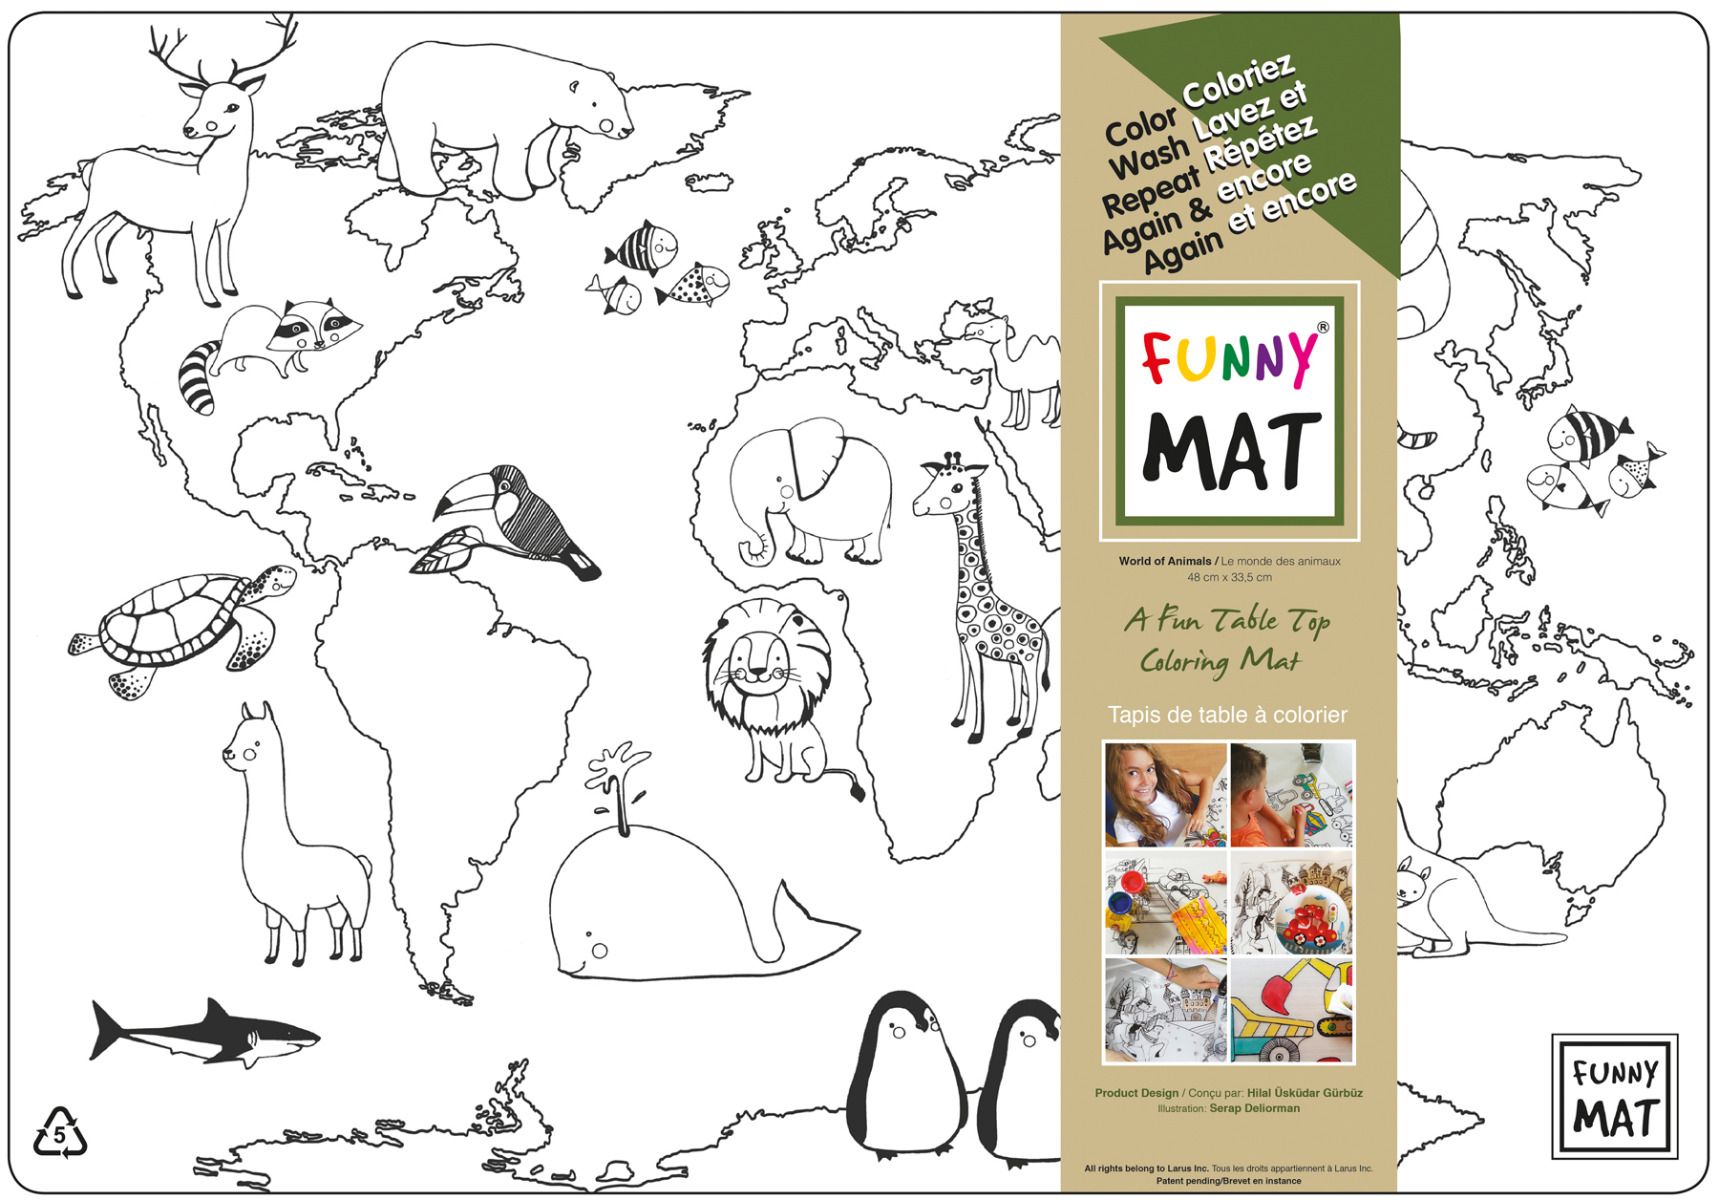 Funny MAT Table Top Coloring Mat - Animal World (White, Single) - Blesket Canada